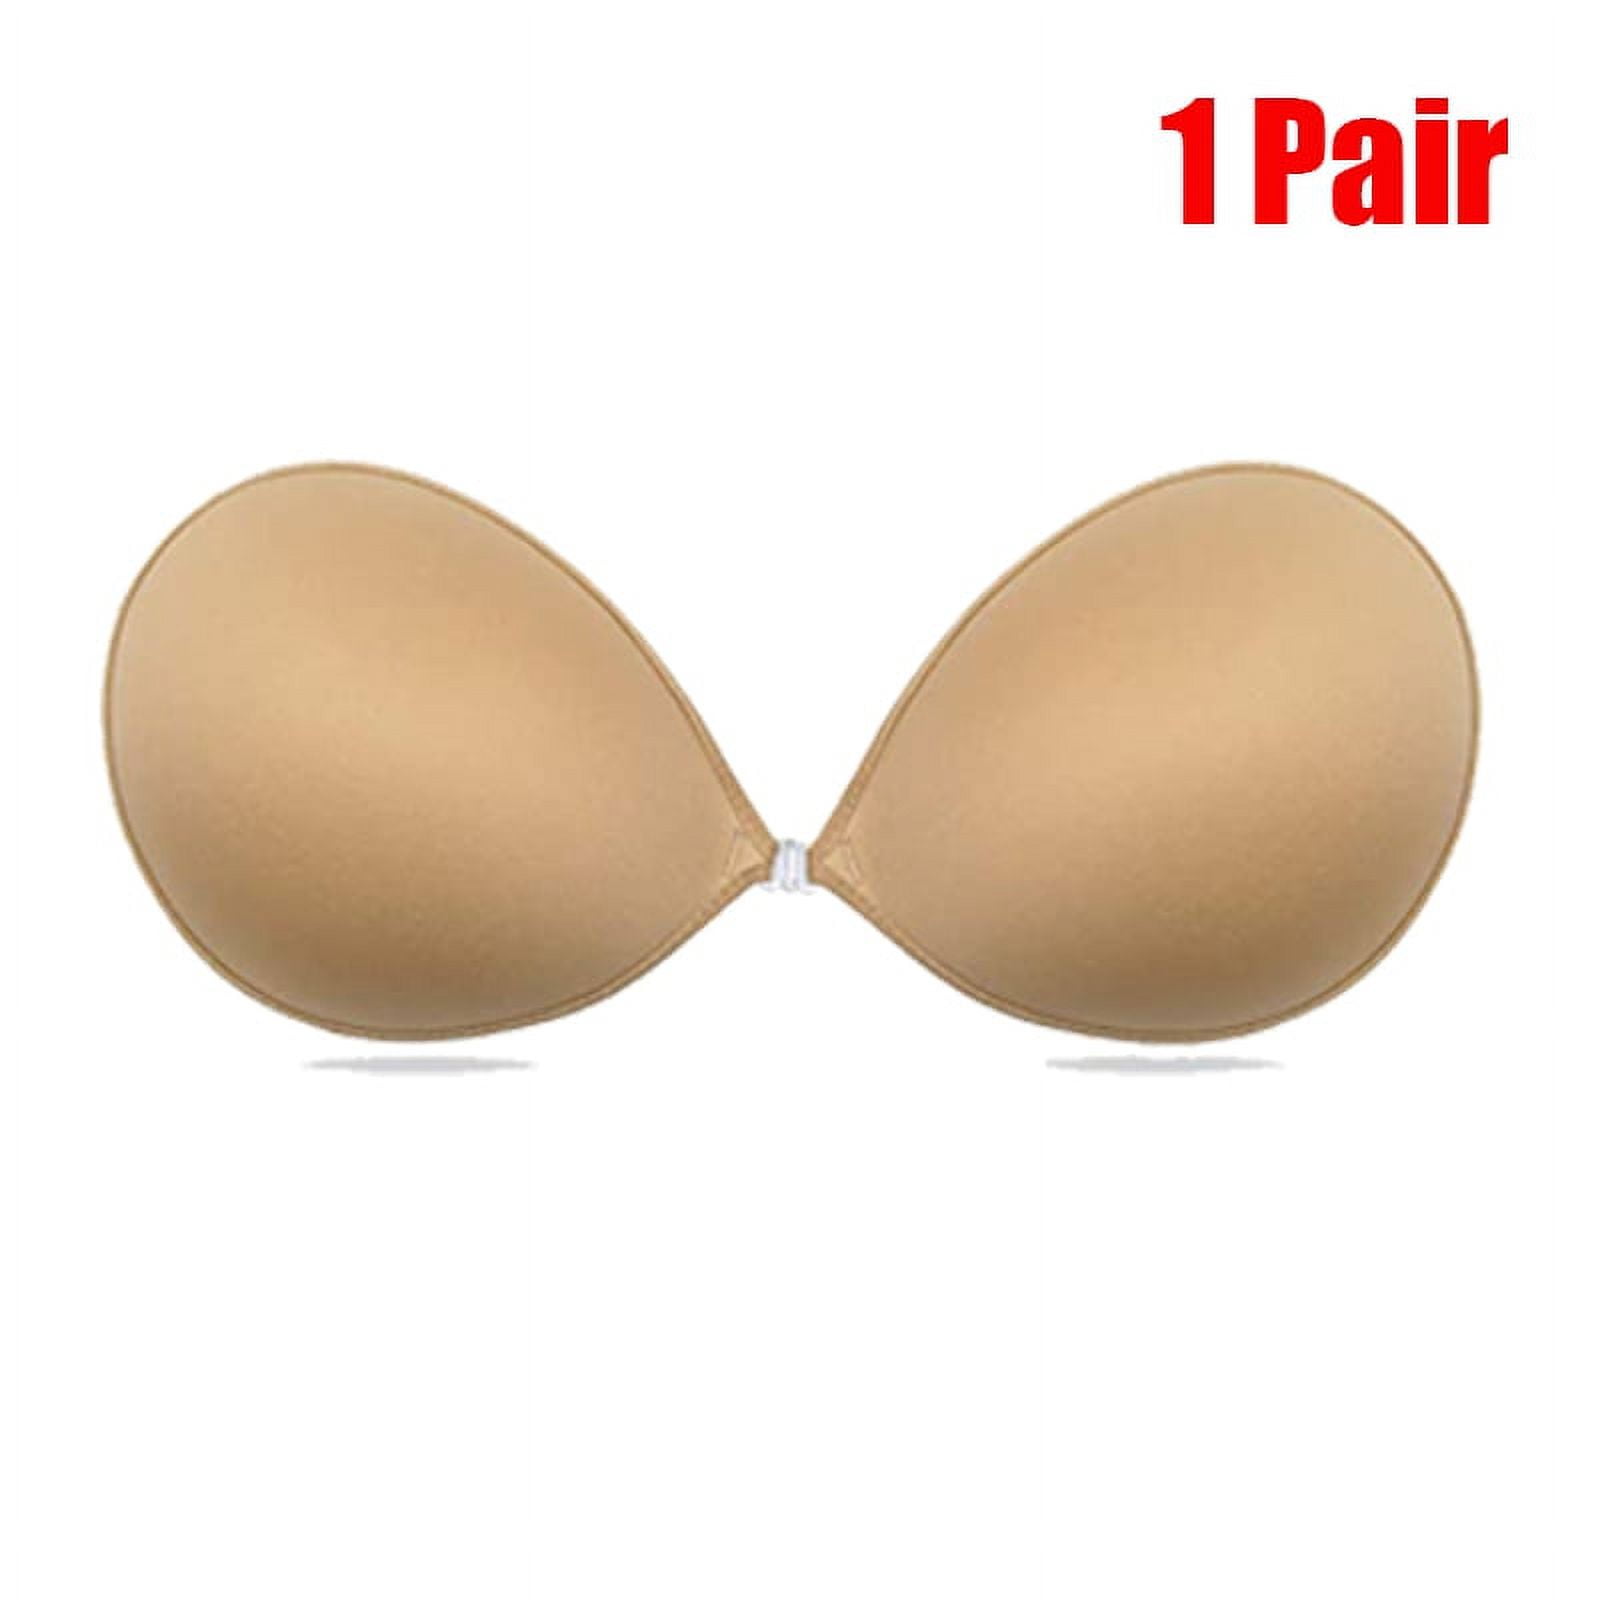 1pair Women's Strapless Silicone Adhesive Bra Push Up Self-adhesive Nipple  Covers For Wedding Dress, Strapless Dress Or Evening Gowns